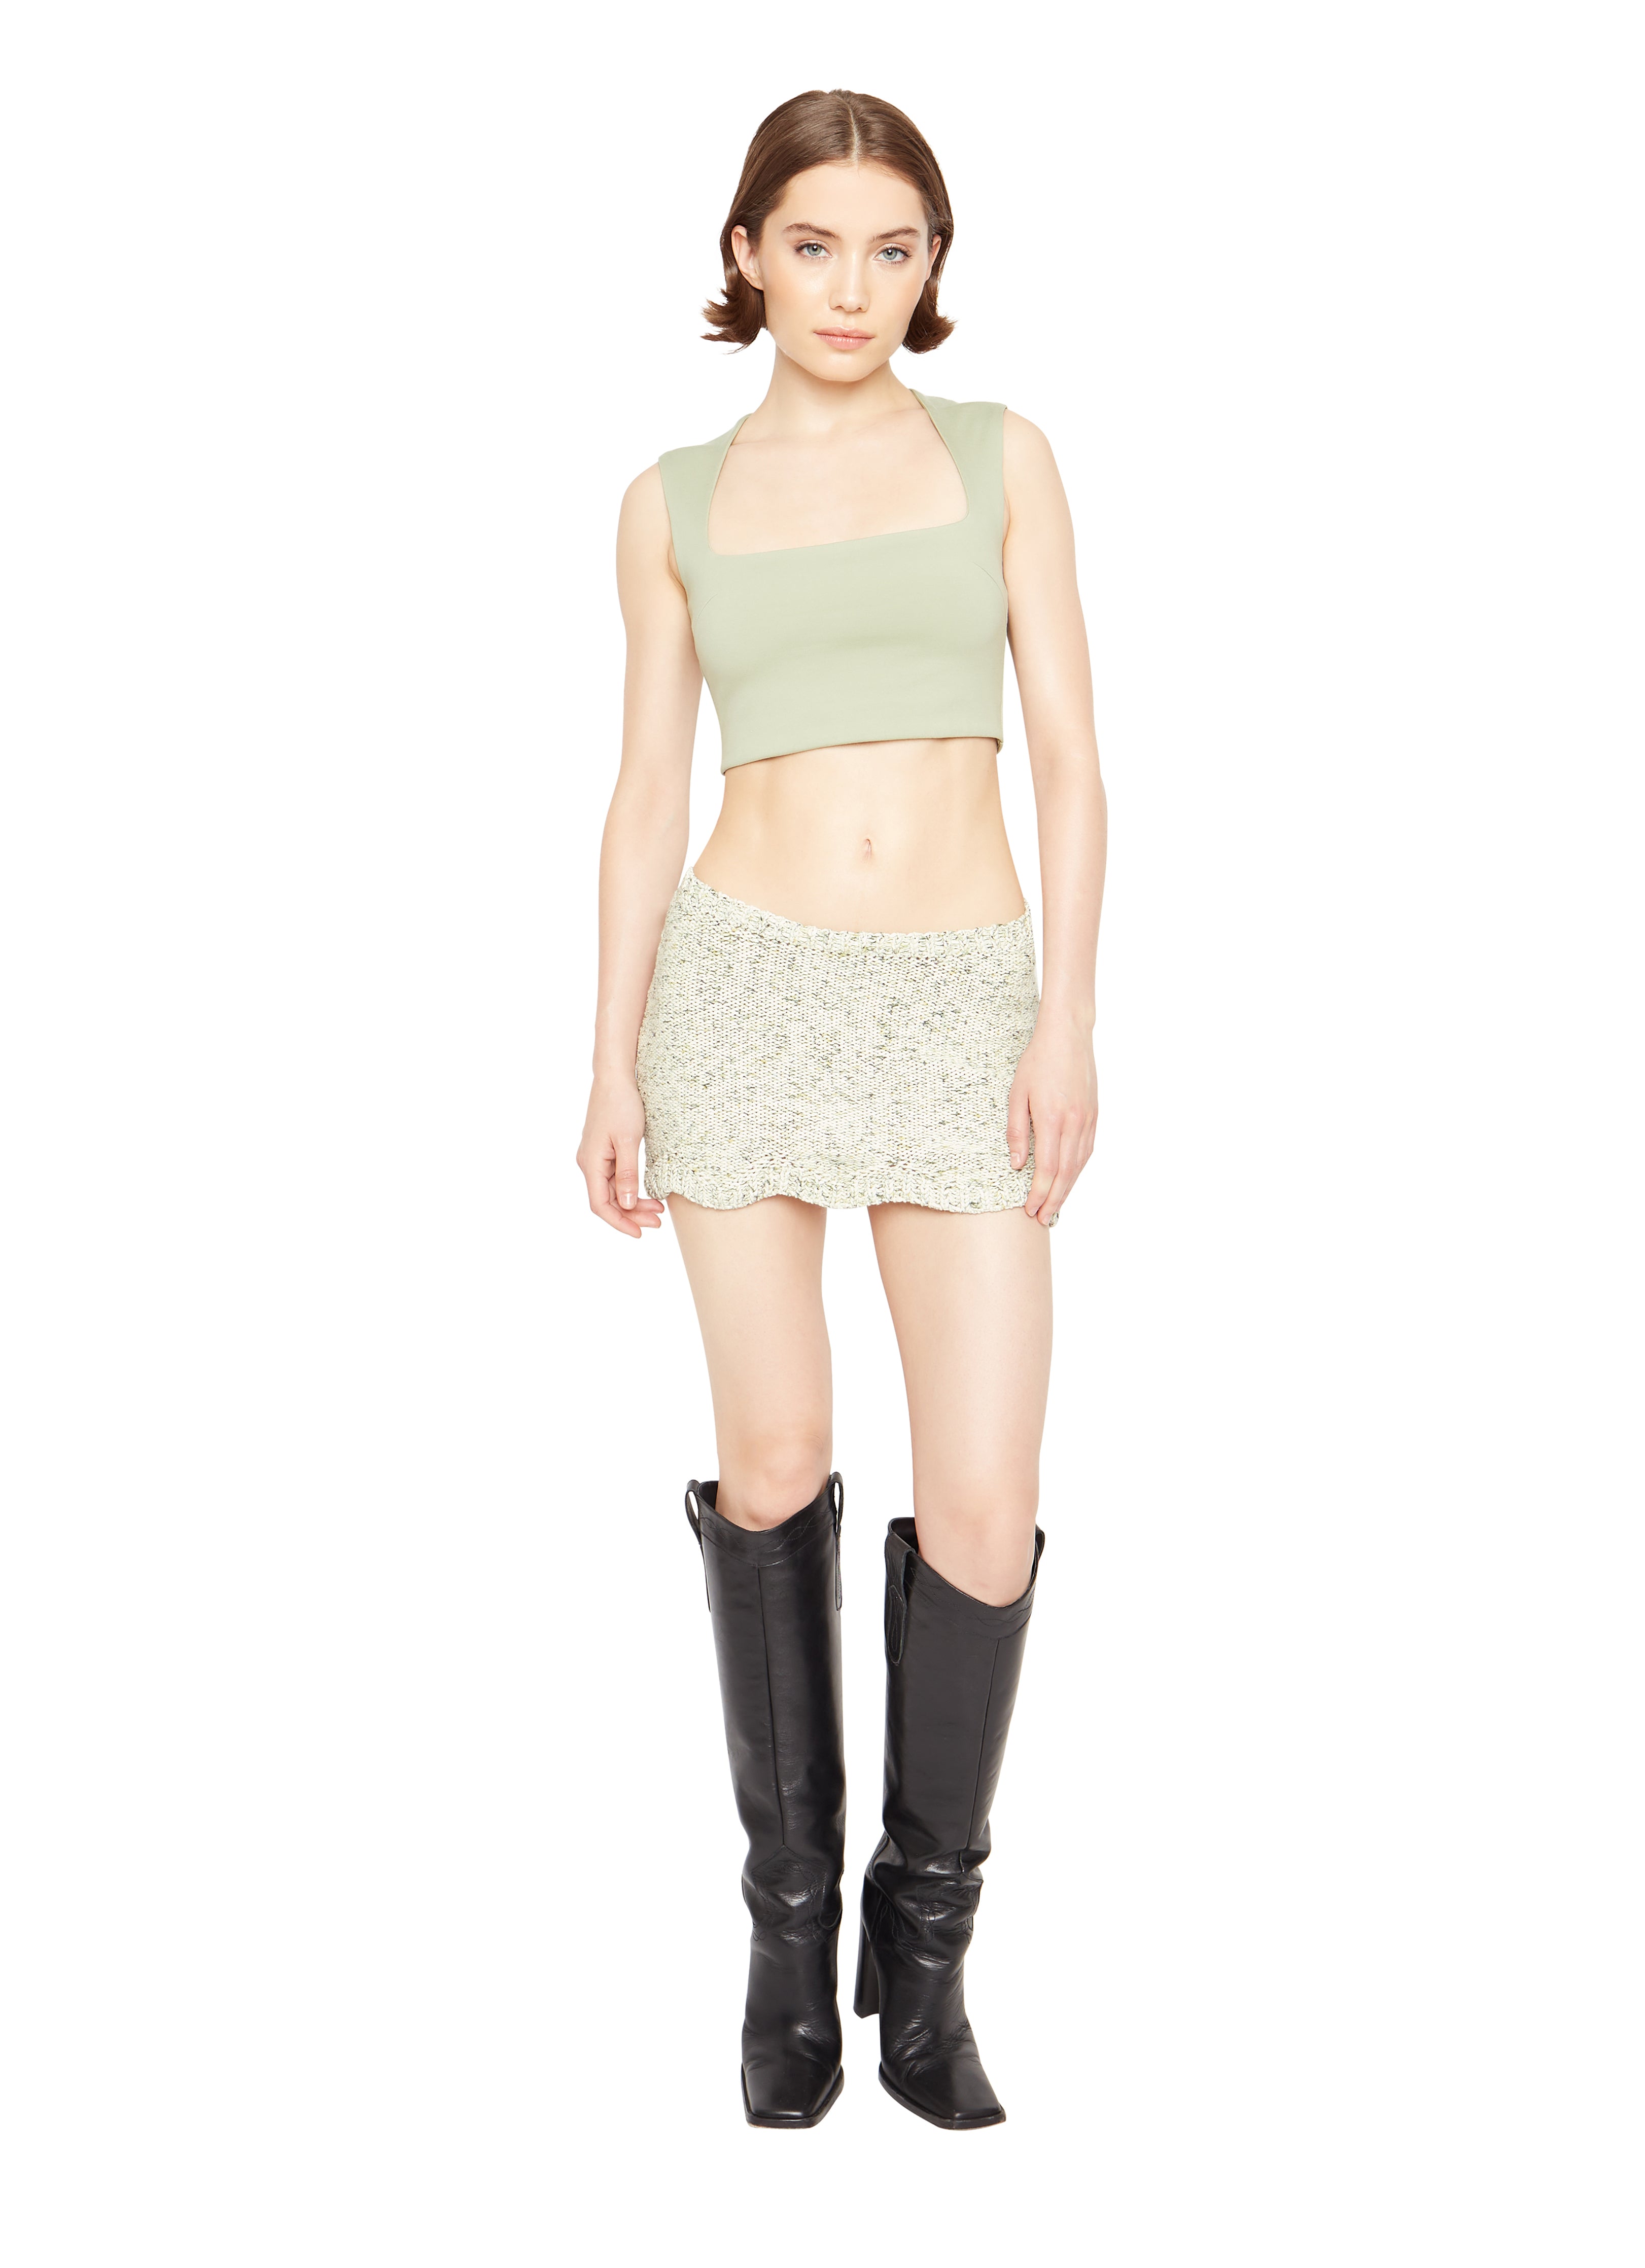 Celestial Stretch Top in Sage Green